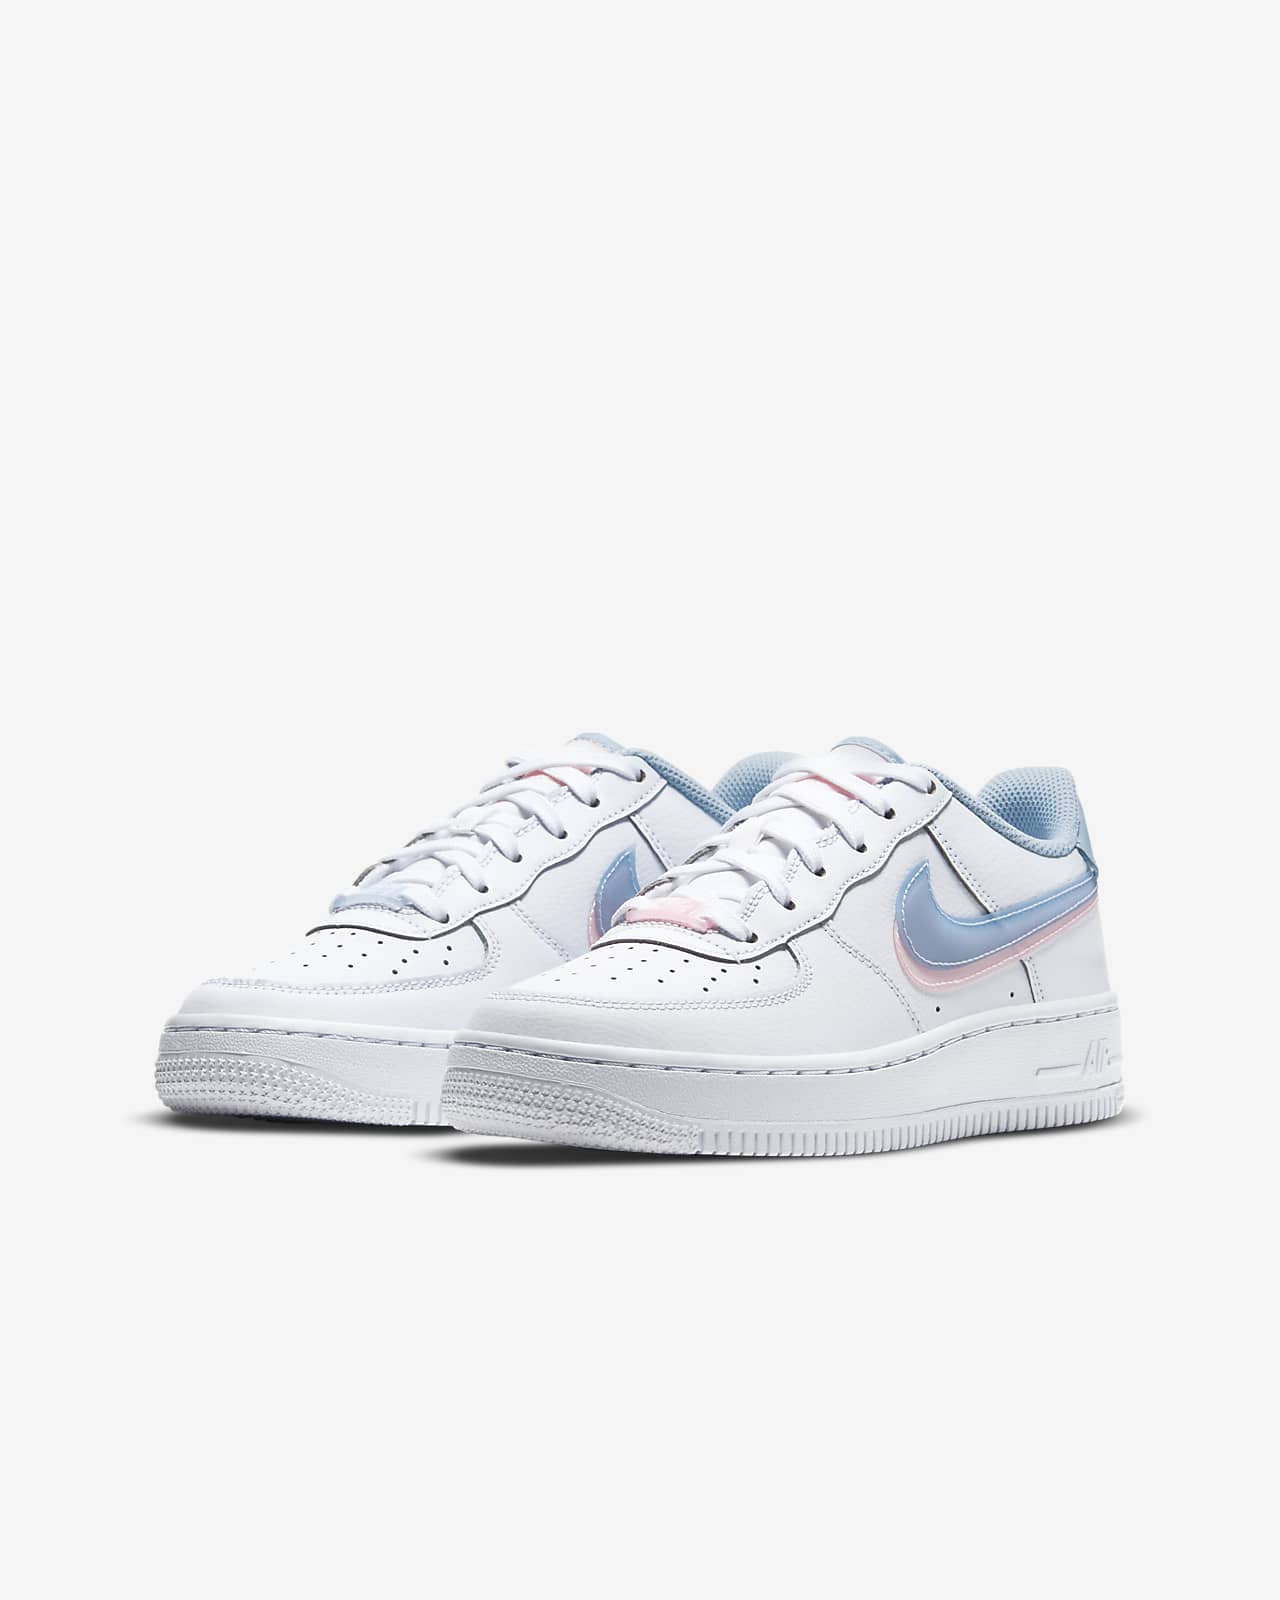 nike air force 1 lv8 pink and white